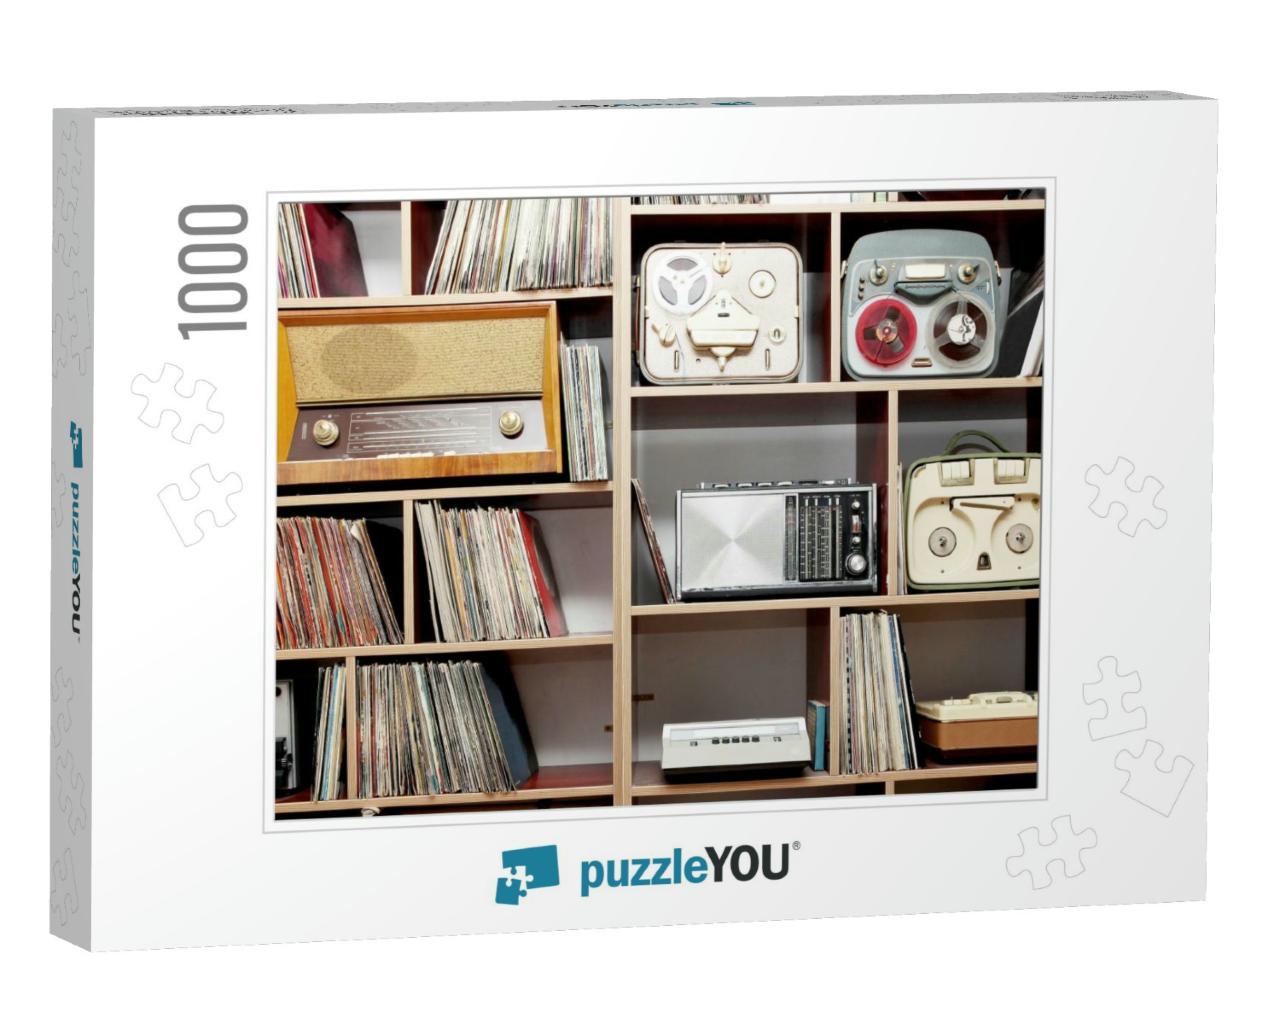 Vintage Radios... Jigsaw Puzzle with 1000 pieces